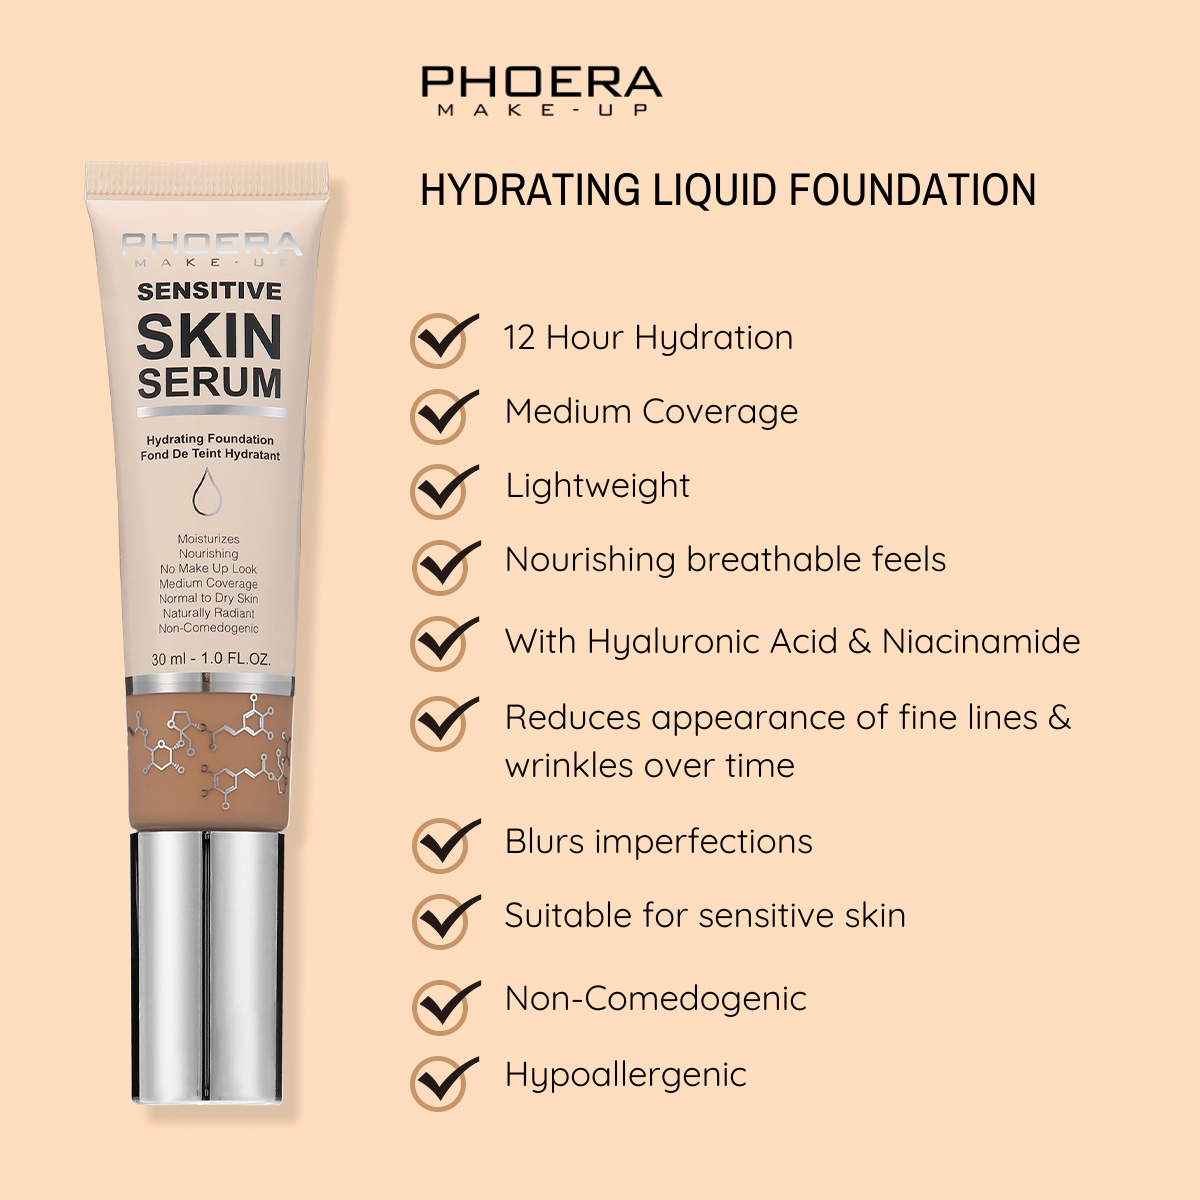 Hydrating Skincare Foundation with Hyaluronic acid